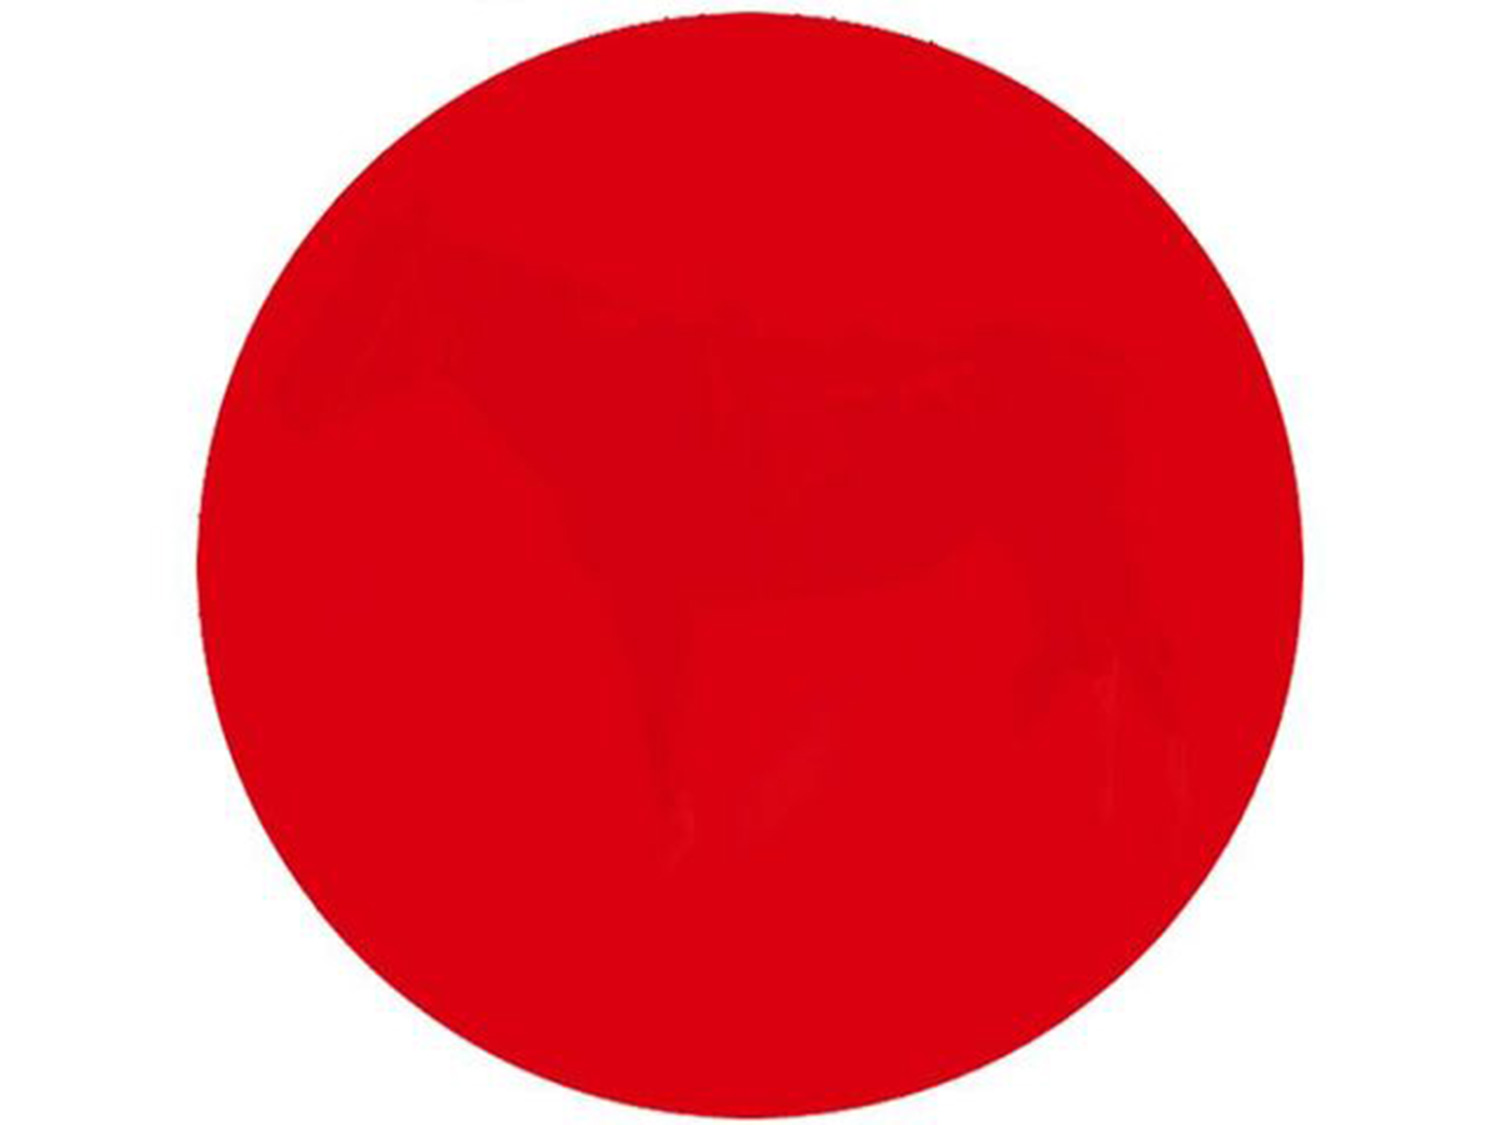 Is your sight good enough to see the horse hidden in this red dot ...